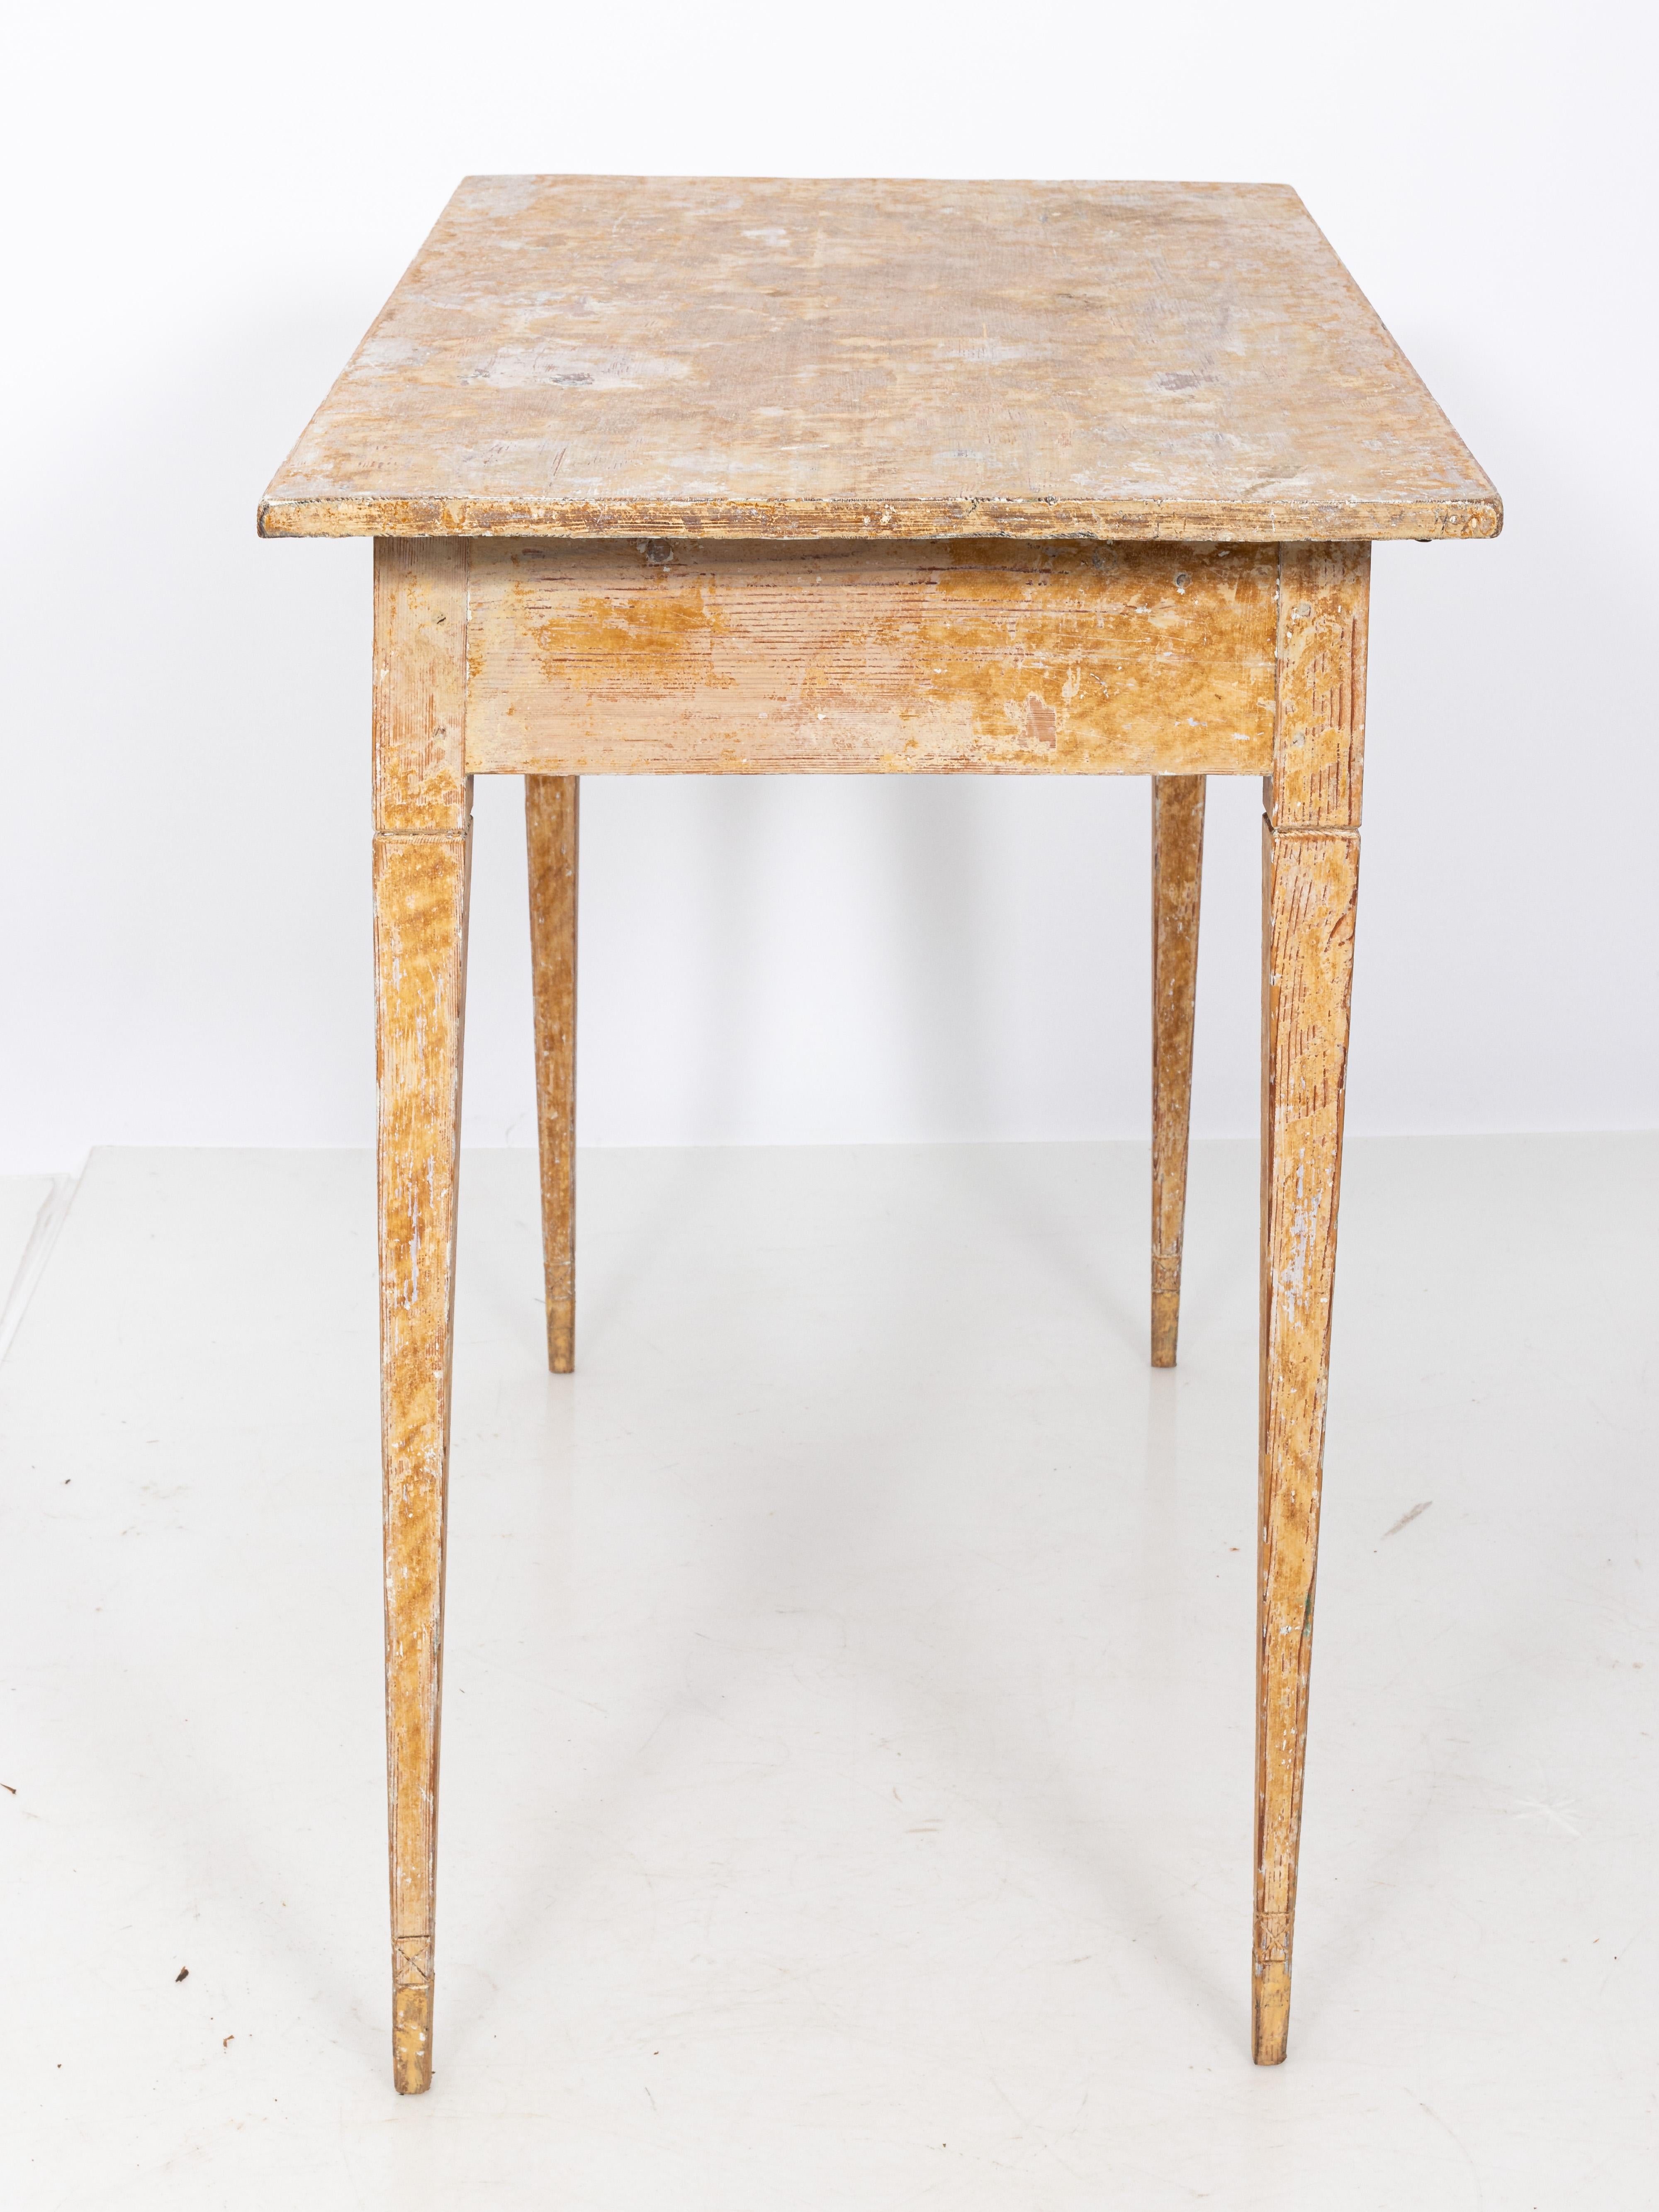 Pine Antique Gustavian Style Writing Desk with Dry Scraped Finish